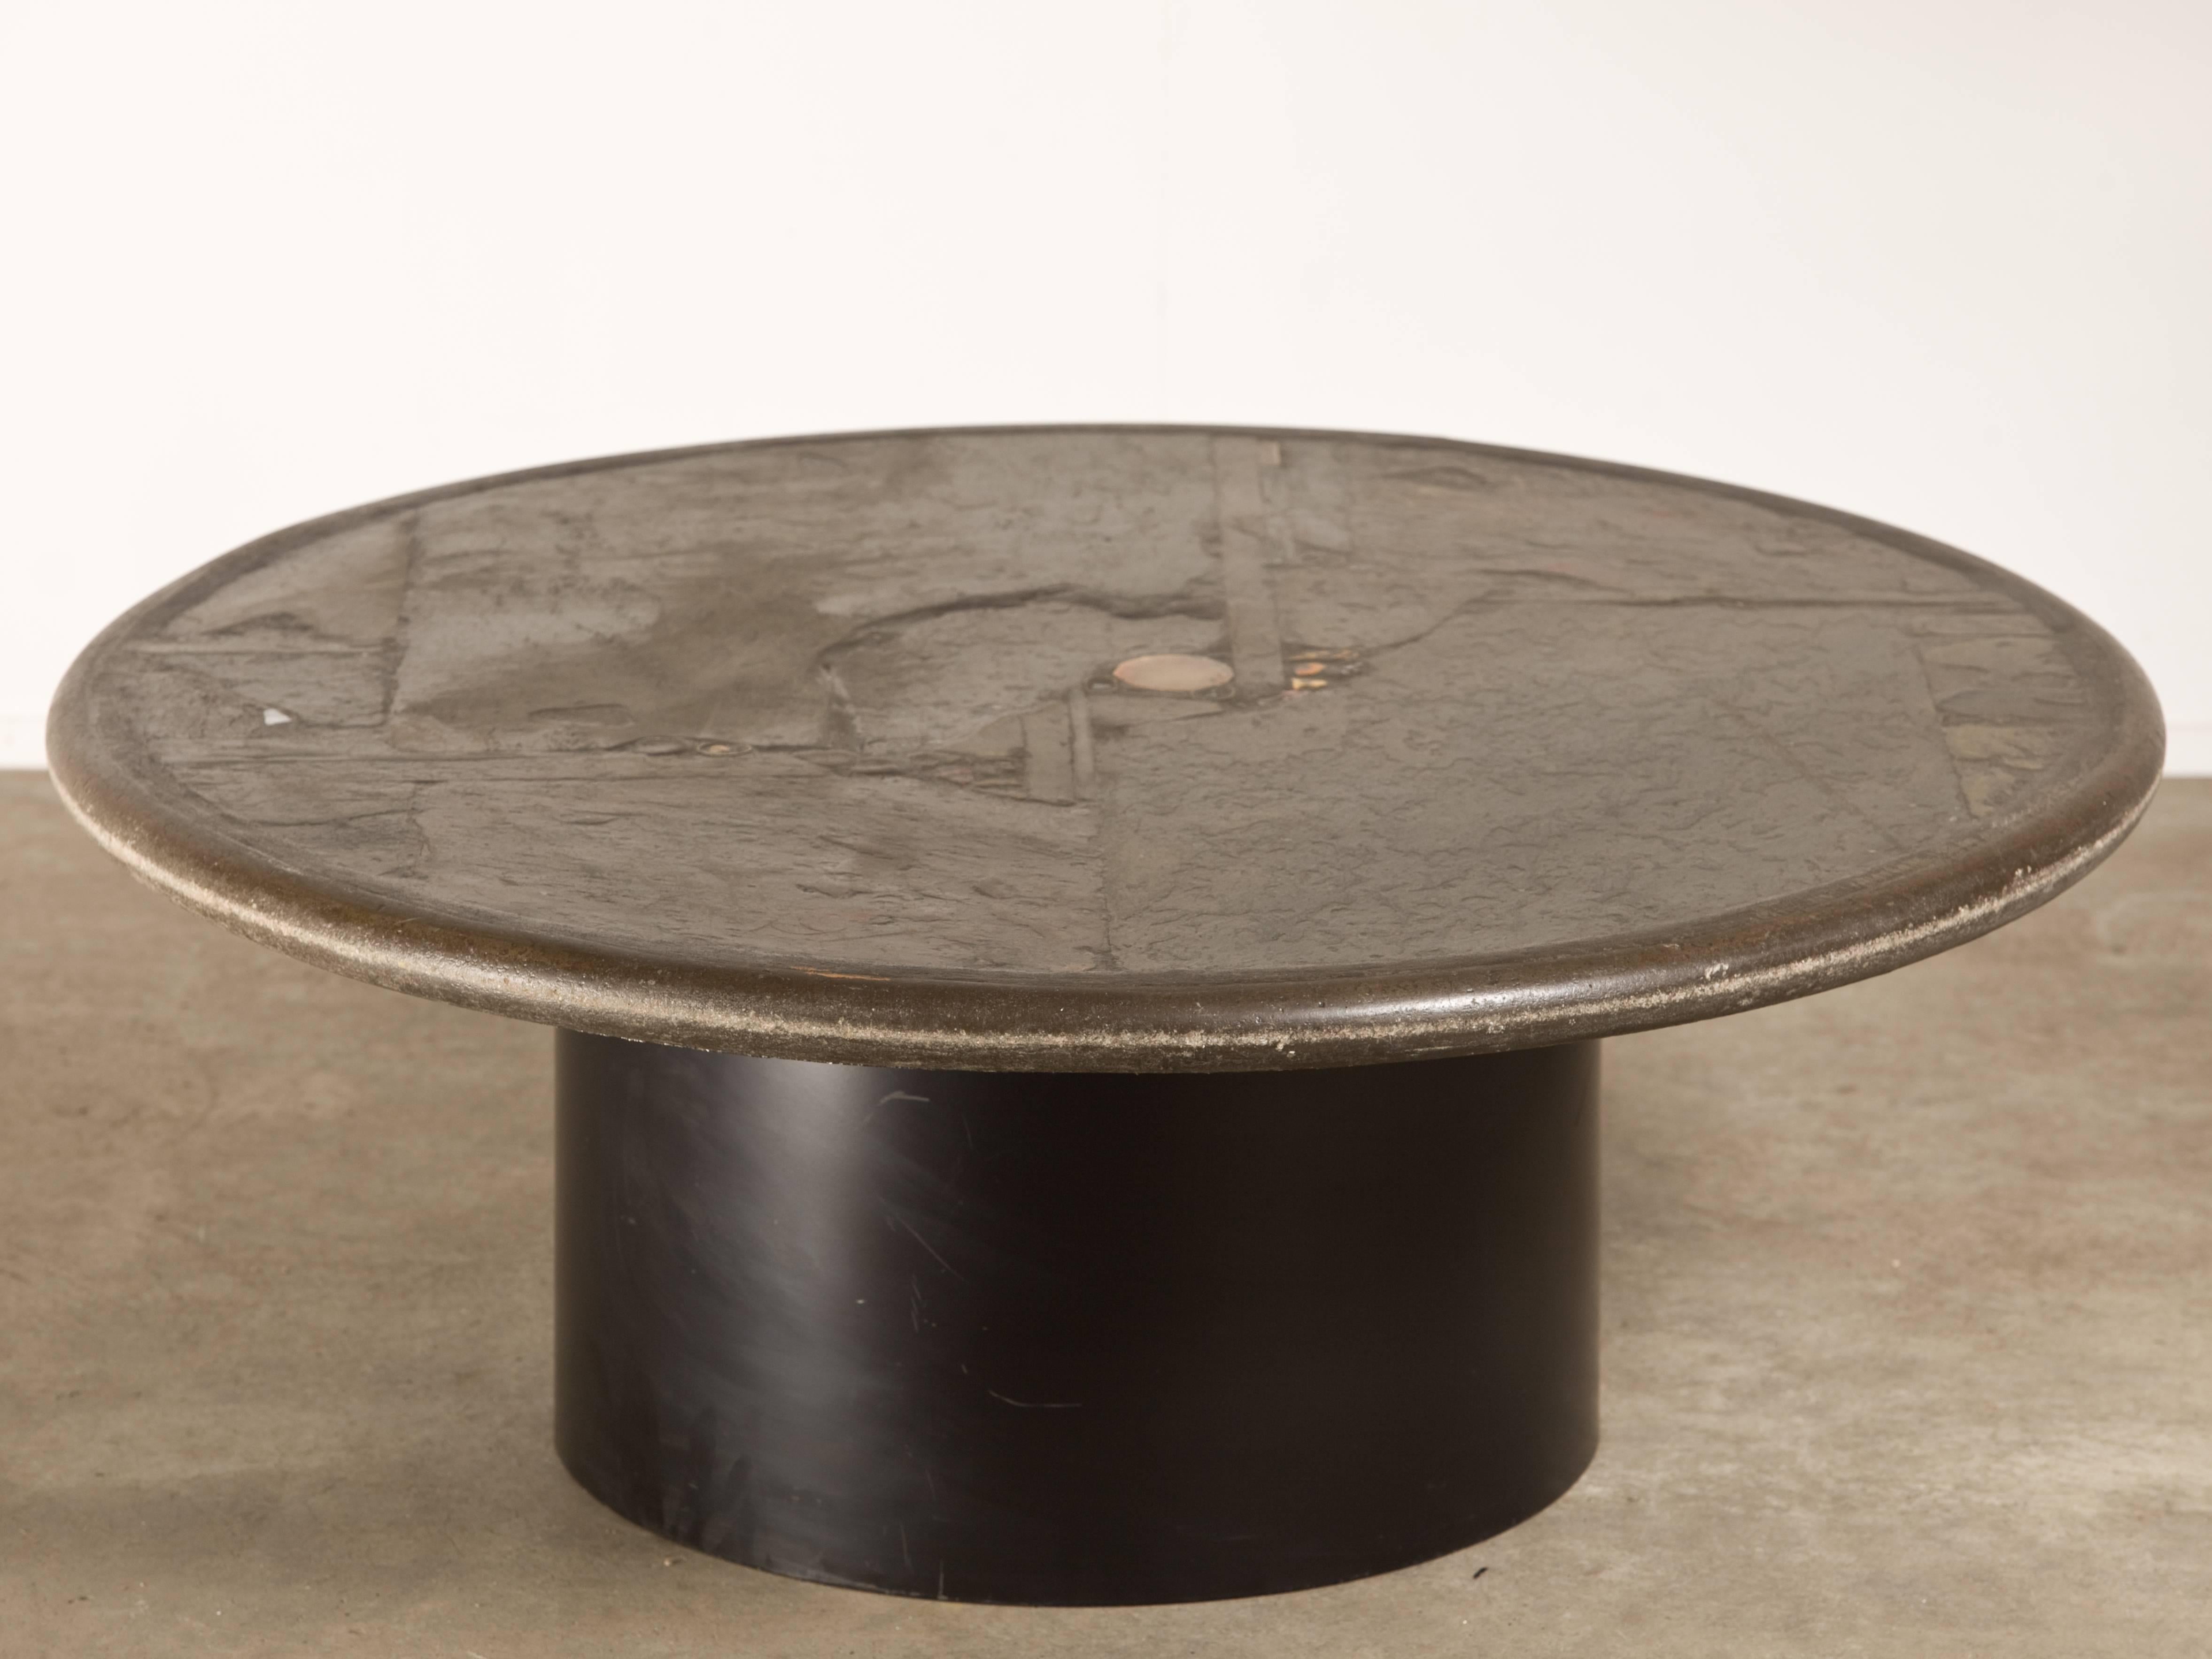 Beautiful dark colored slate stone Dutch design Brutalist style coffee table by Paul Kingma.
It has different shades of grey and amber yellow and blue-ish details. The table is signed in a copper inlay P. Kingma, 1989.